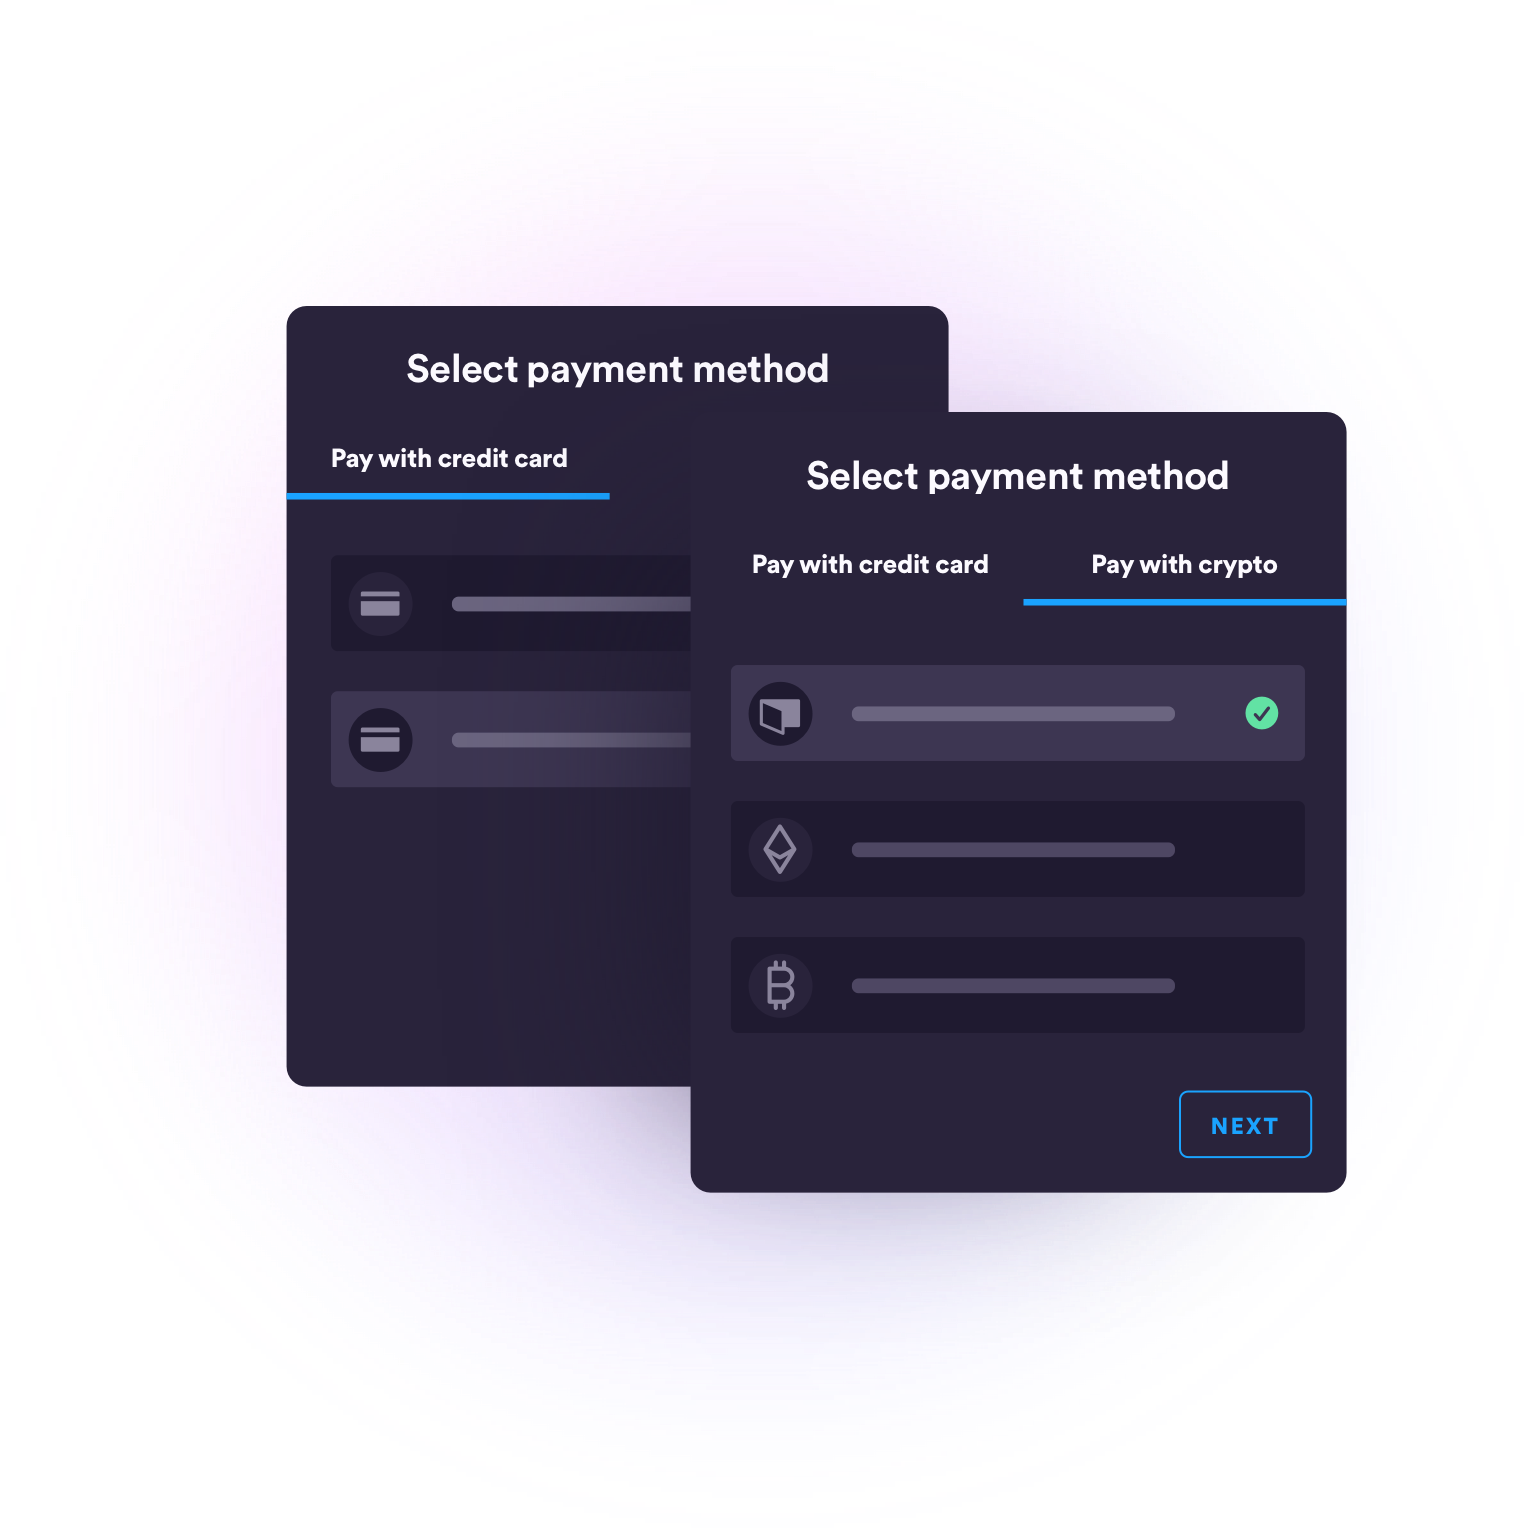 Select payment method - pay with credit card or pay with crypto